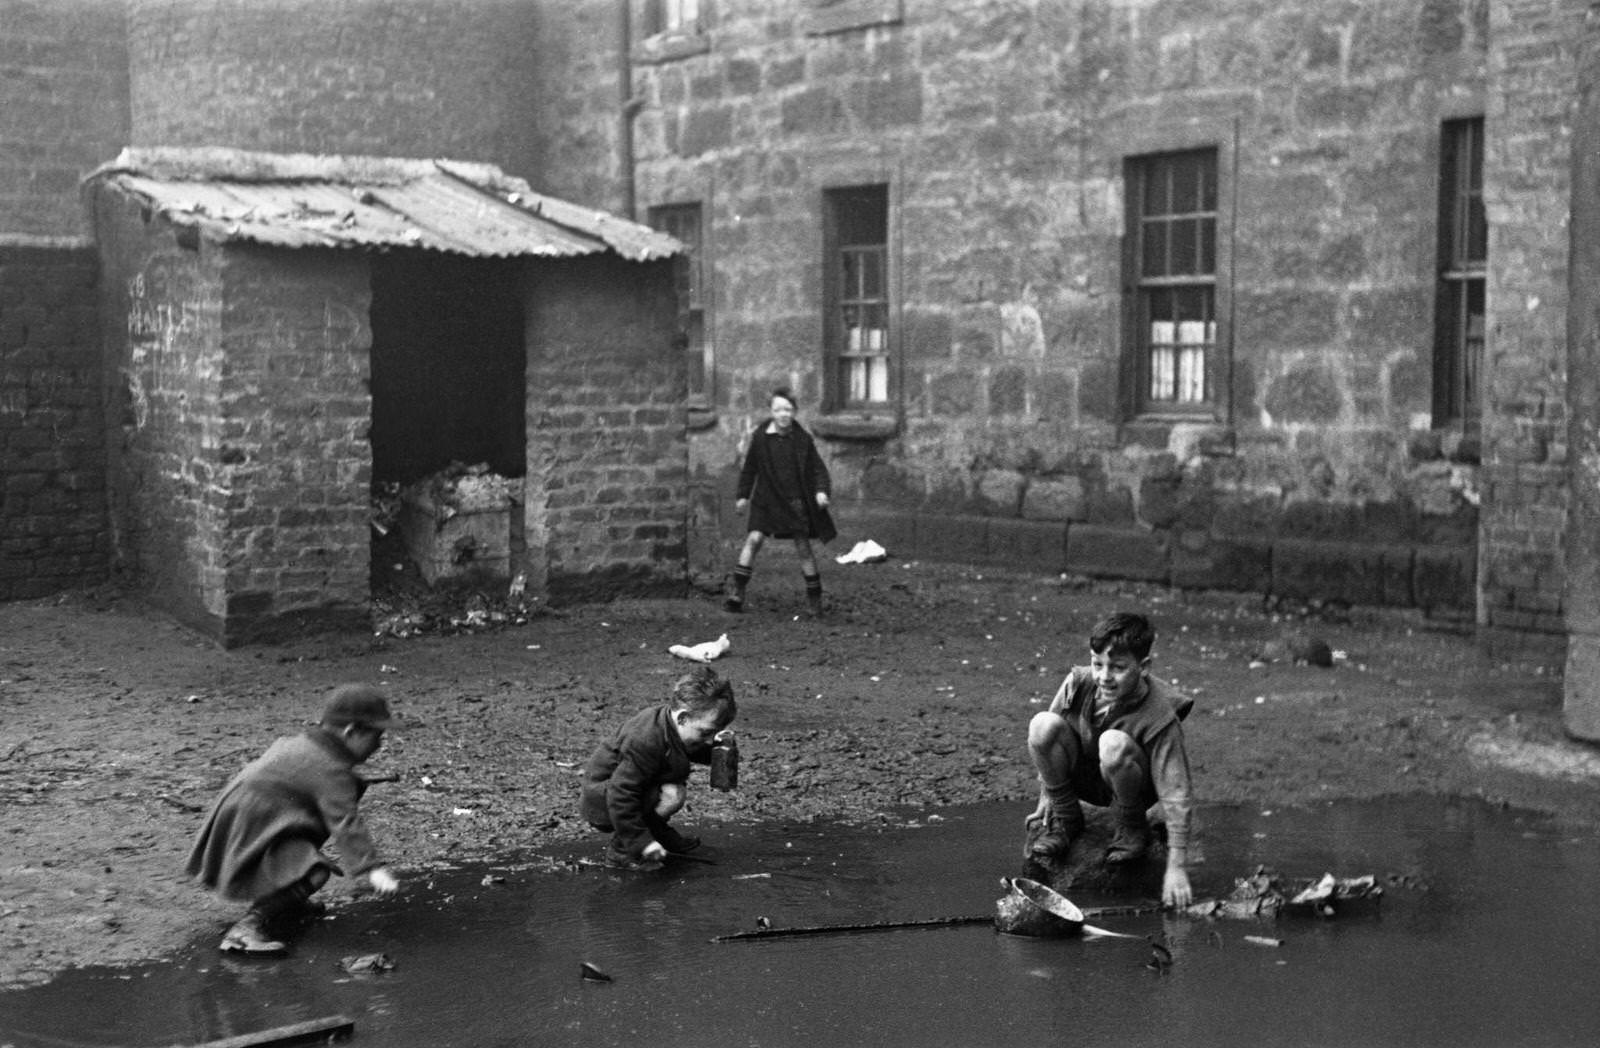 Children play in a yard with the 'Gorbals', a notorious slum area of Glasgow, January 1948.